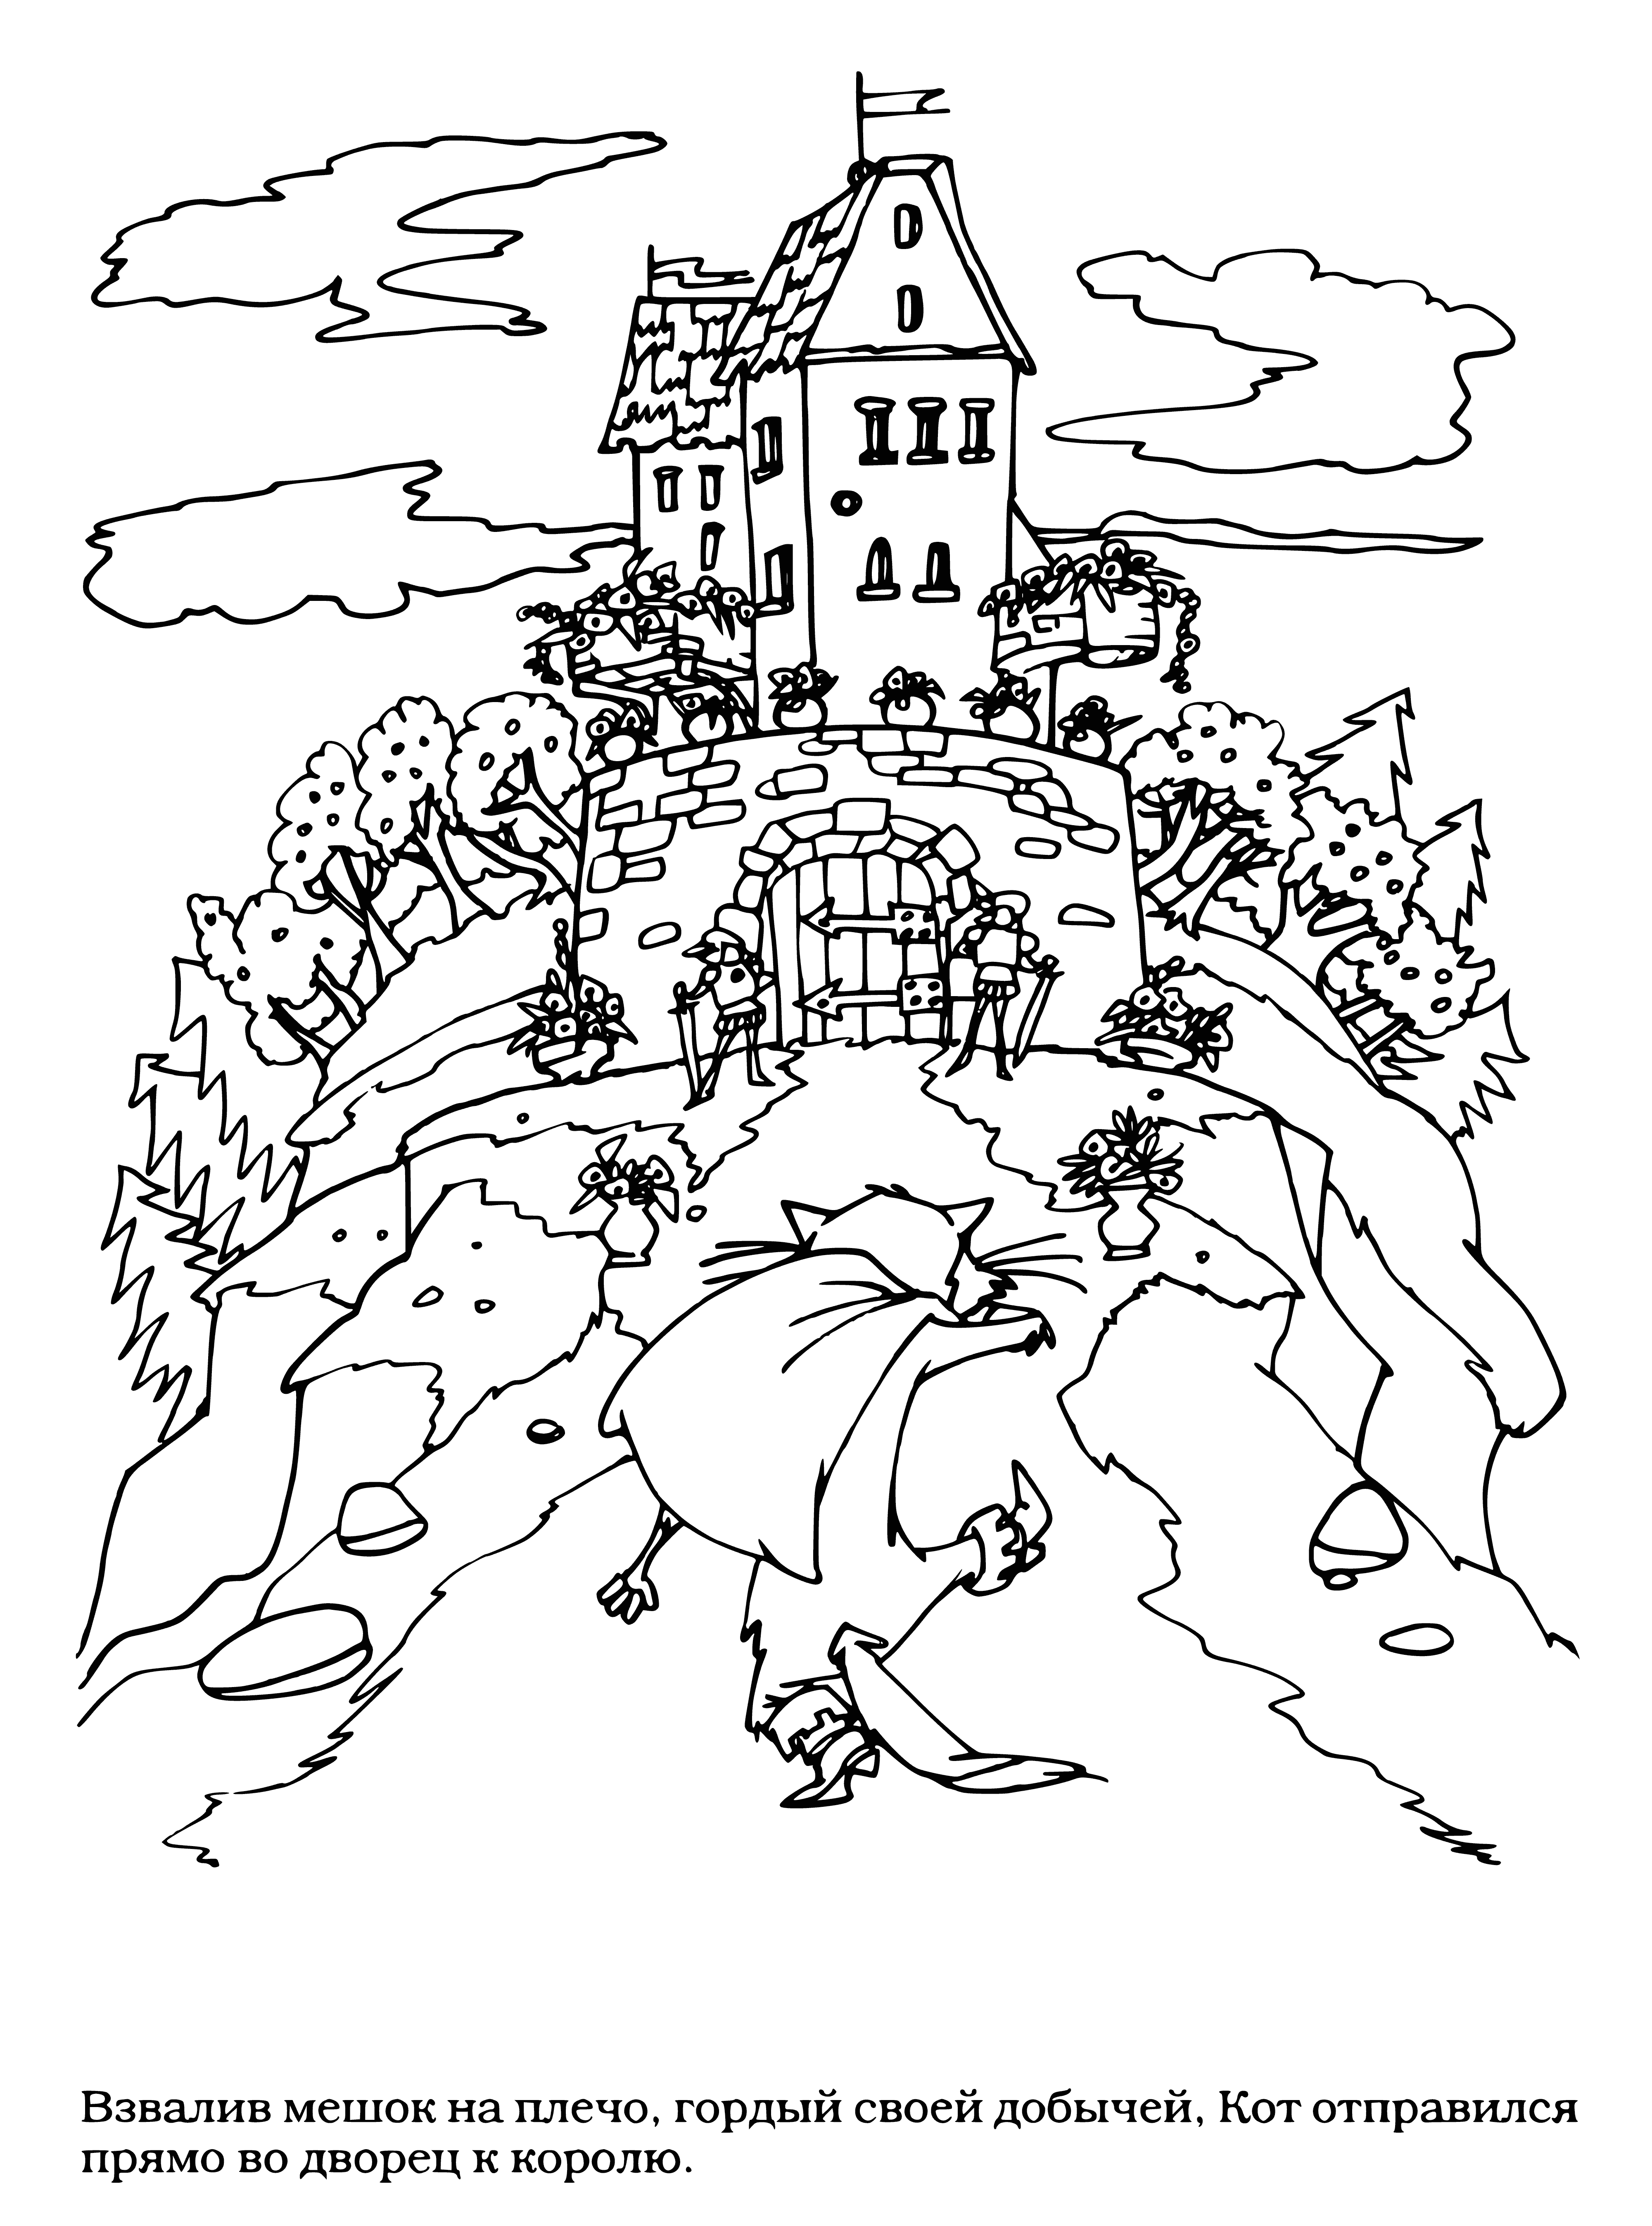 coloring page: A curious black cat explores a grand palace, taking in its luxurious surroundings.